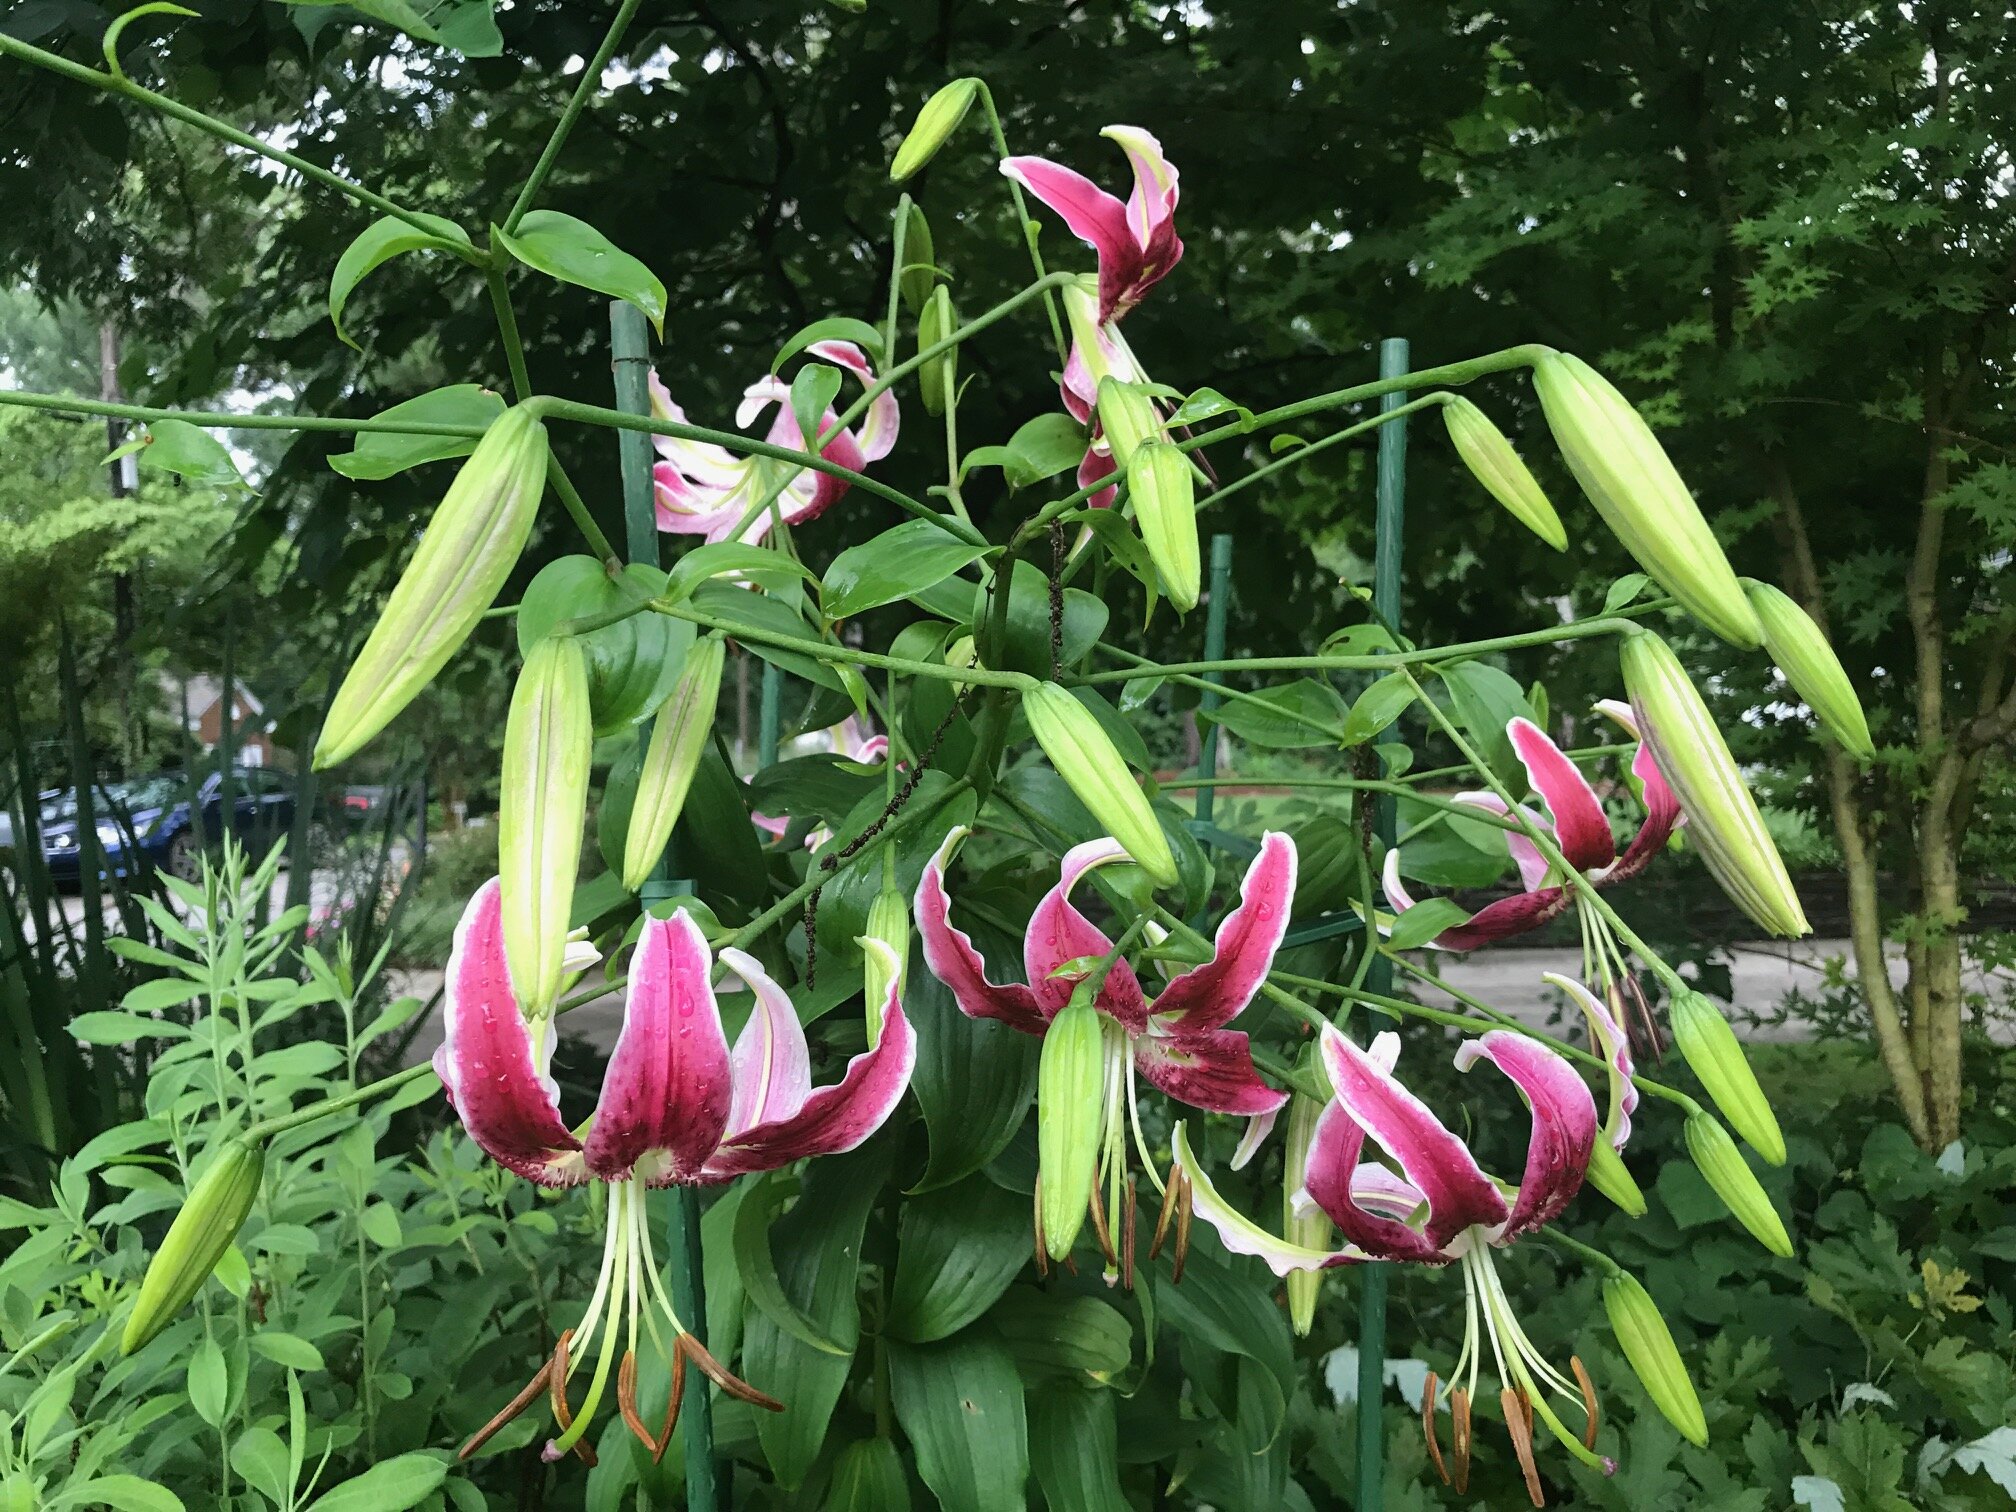 Lilium Black Beauty, AMA, June 28, 2018, NOTICE THE BUDS, A TALL LILY.jpg